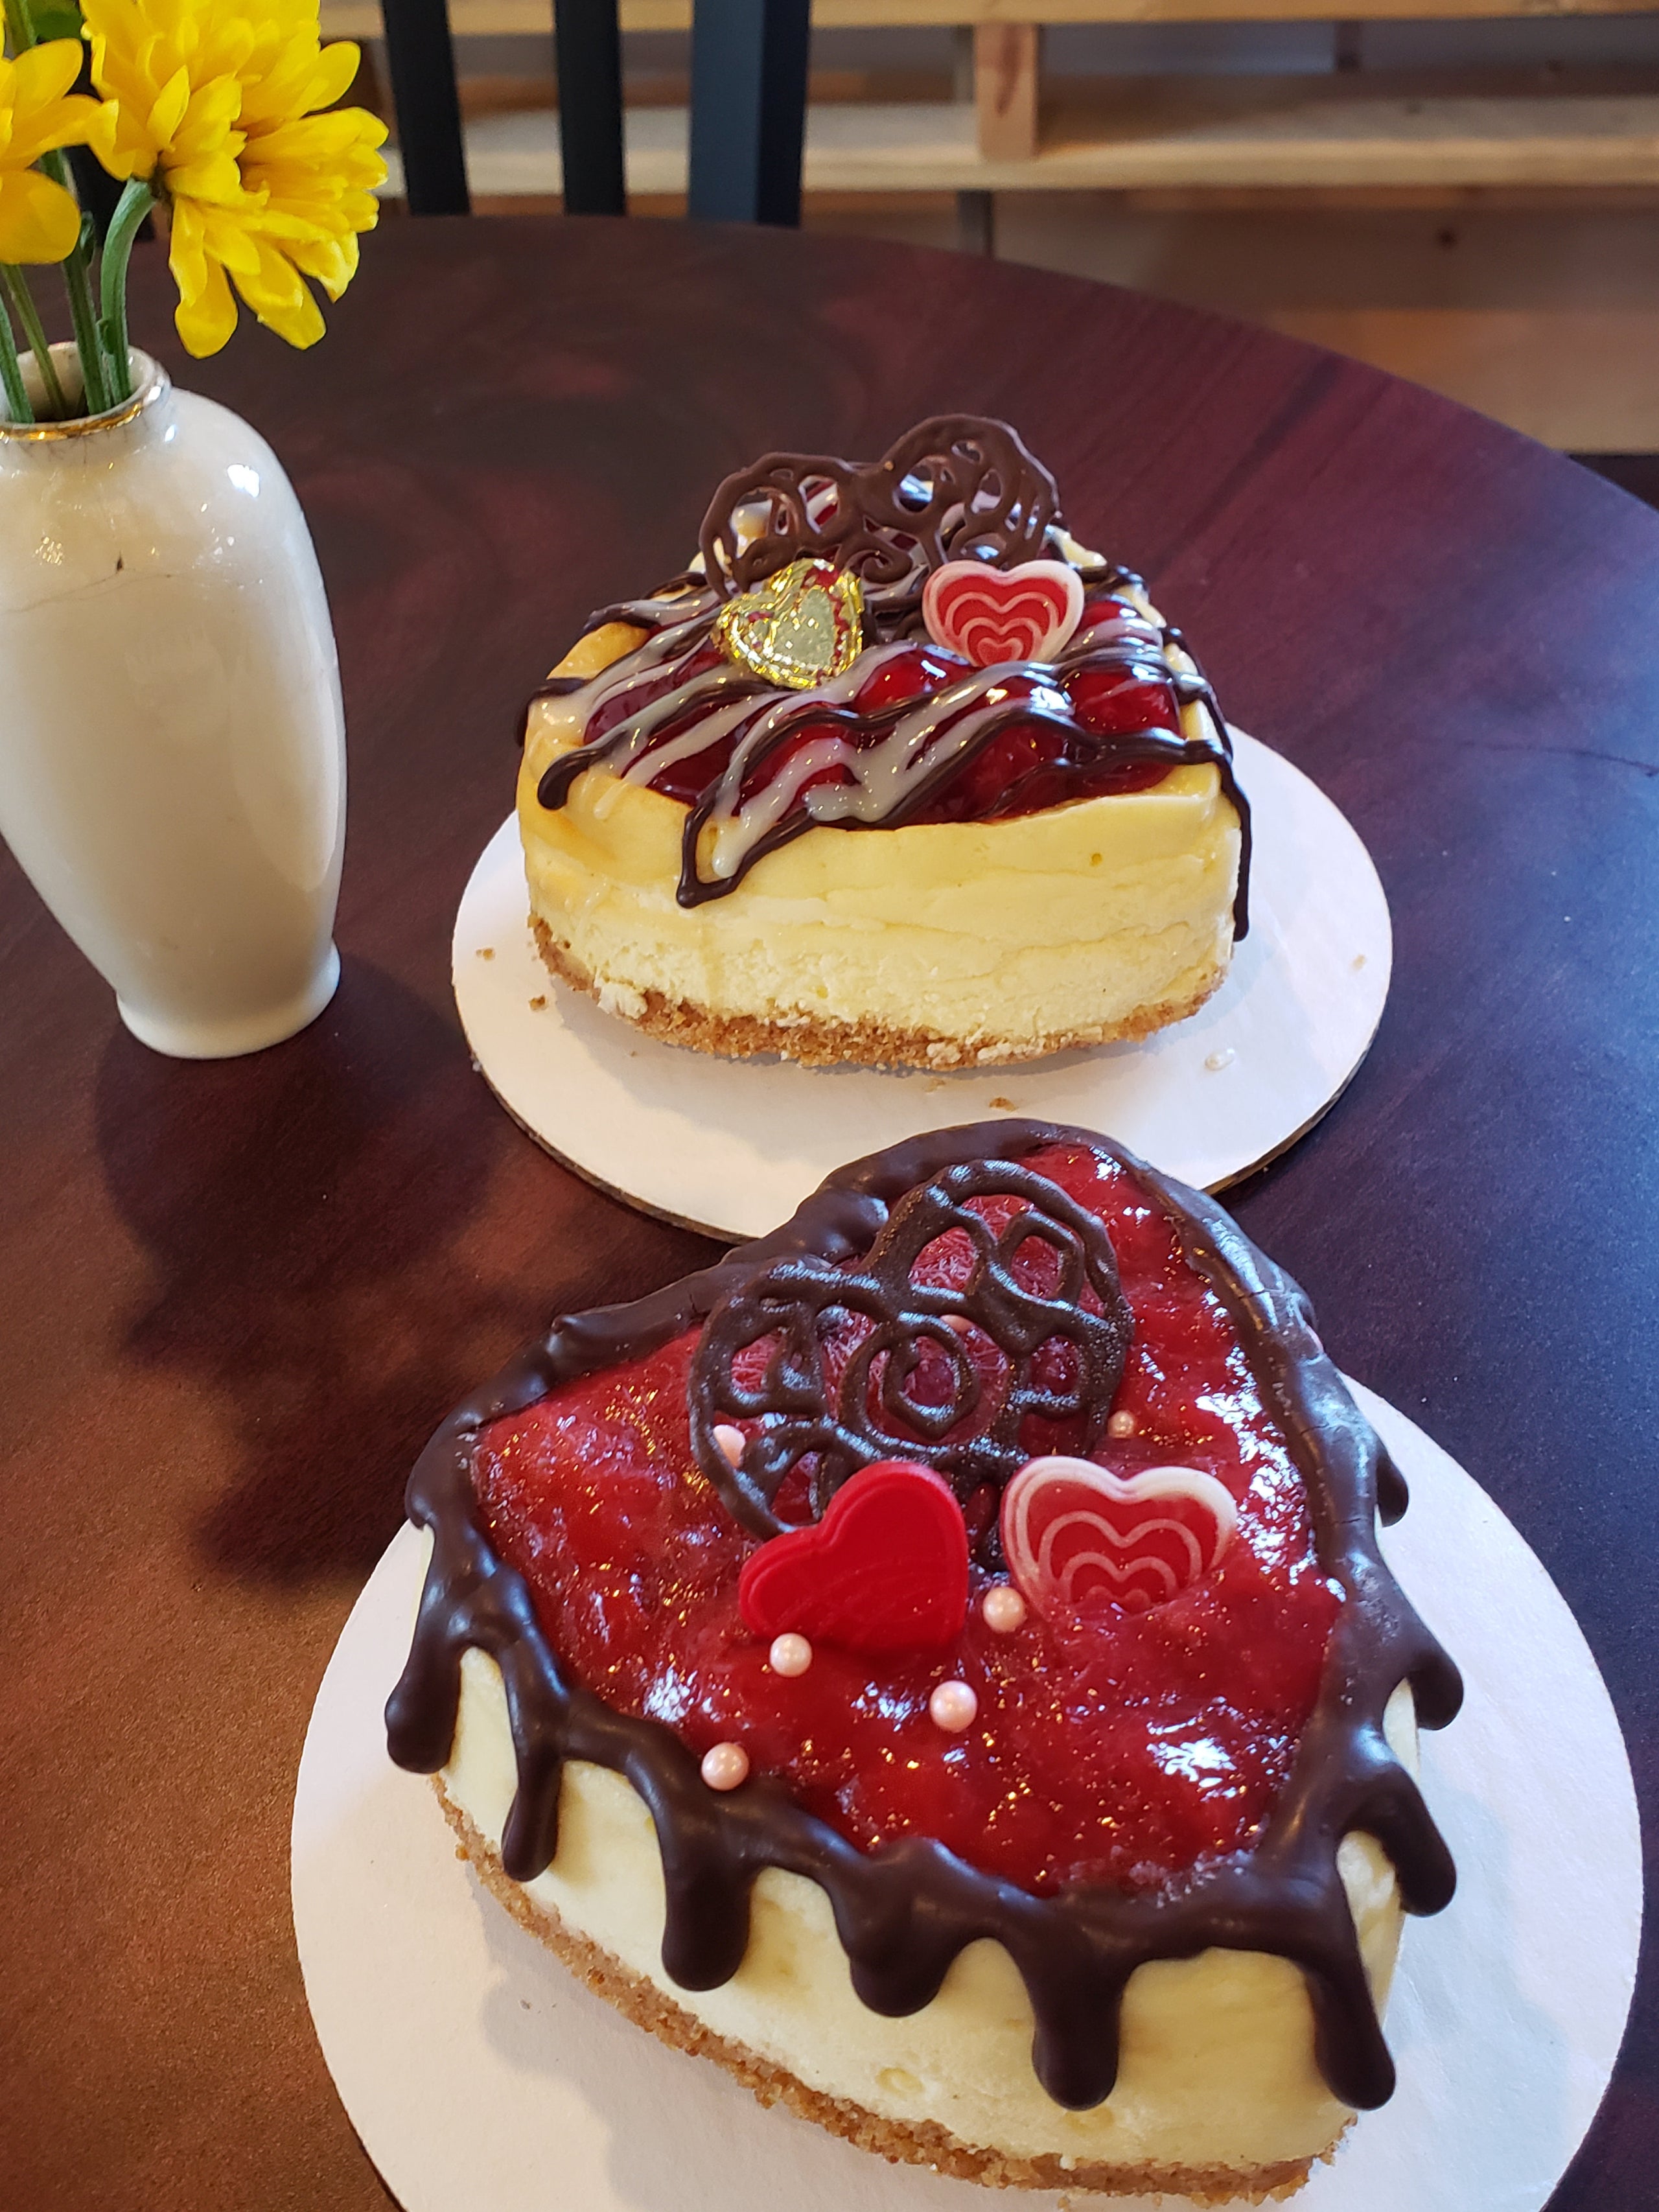 4 inch heart shaped cheesecake for 2